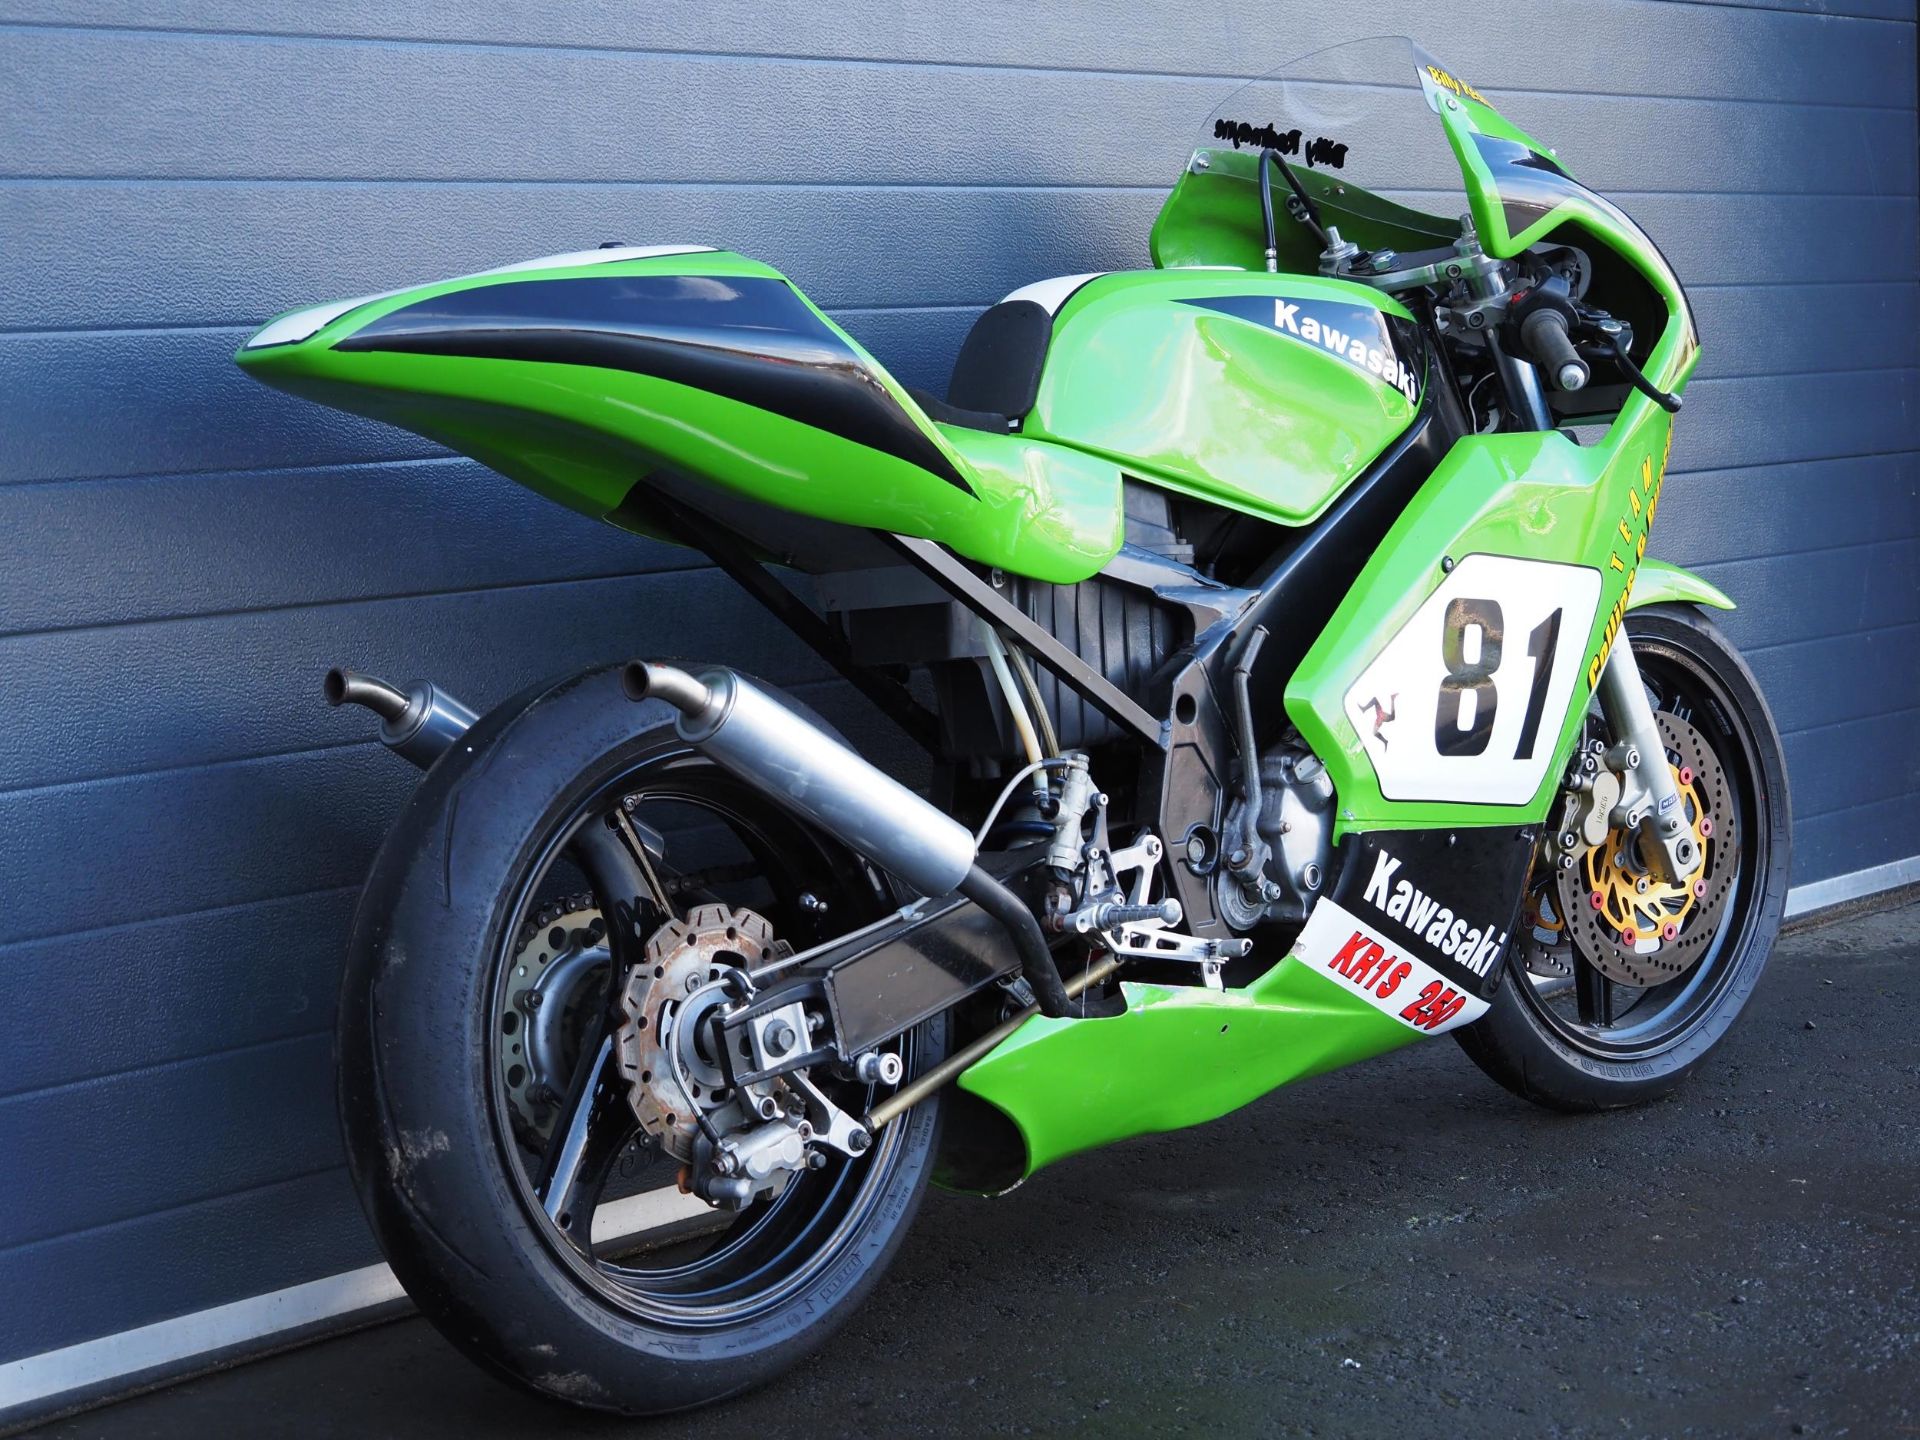 Kawasaki KR1-S 250 F2 motorcycle. 1992 This bike was ridden by Billy Redmayne at the 2015 Classic F2 - Bild 4 aus 8